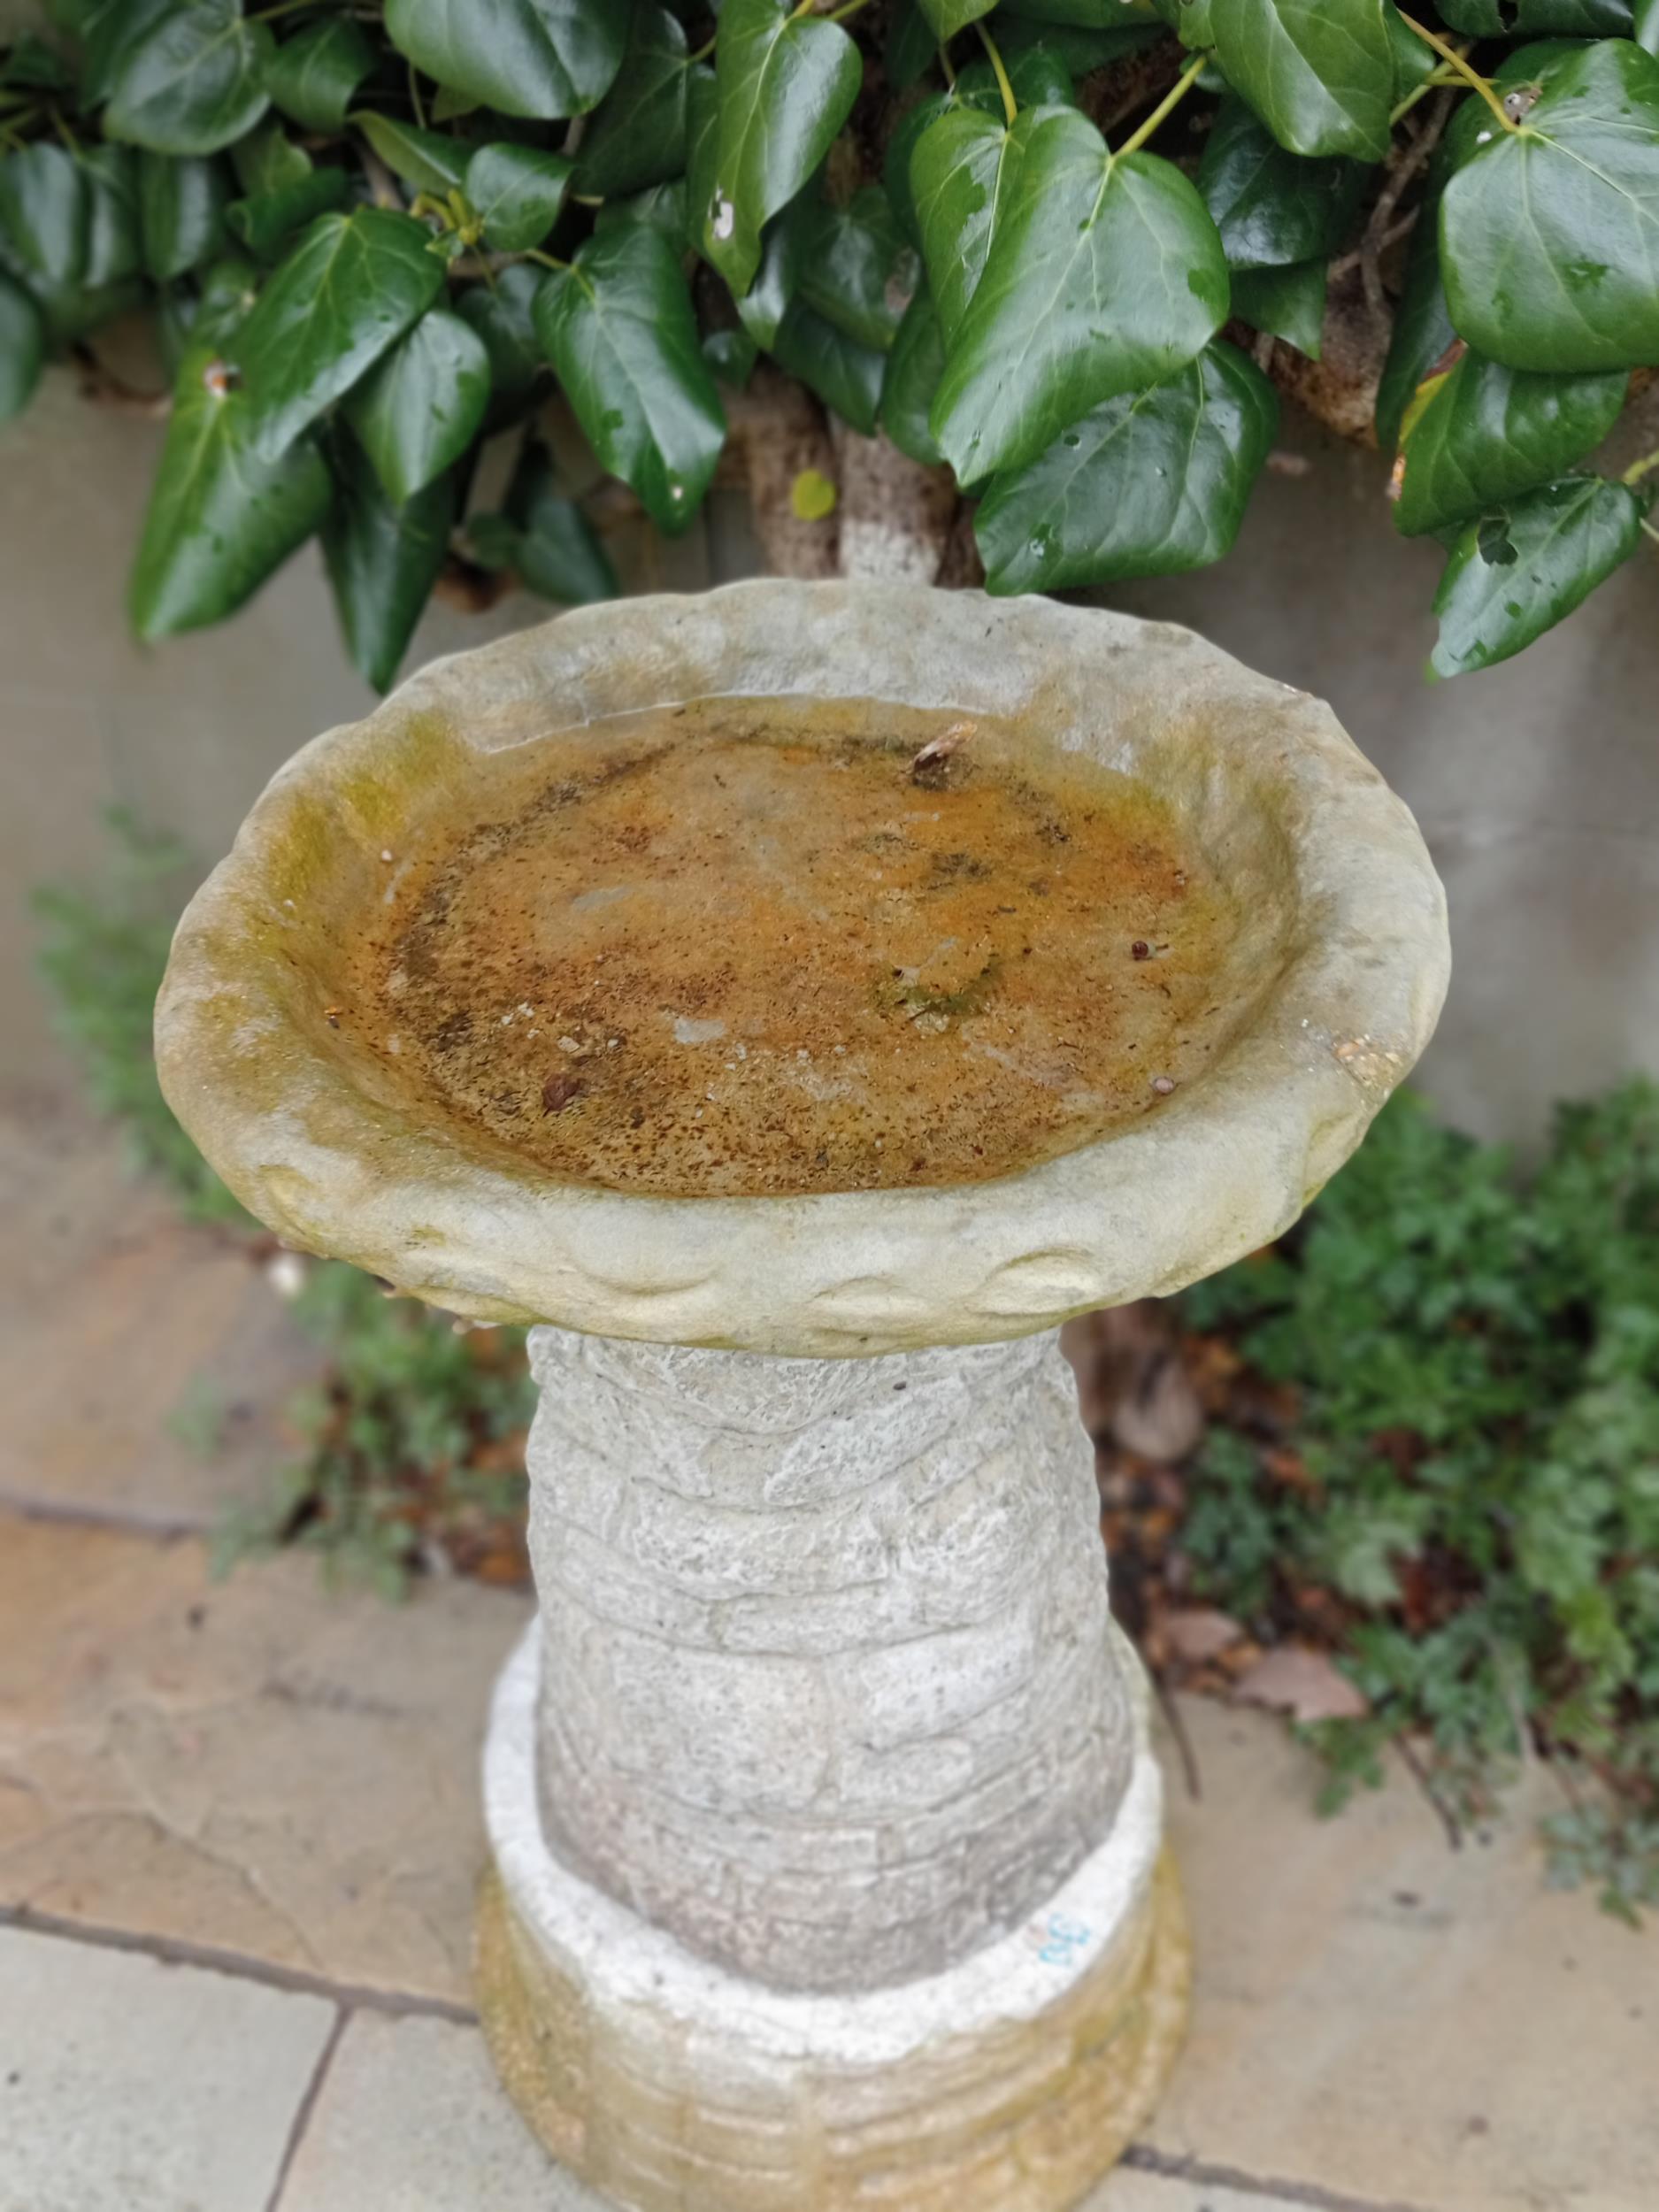 Composition stone bird bath {H 60cm x Dia 36 cm }. (NOT AVAILABLE TO VIEW IN PERSON) - Image 2 of 2